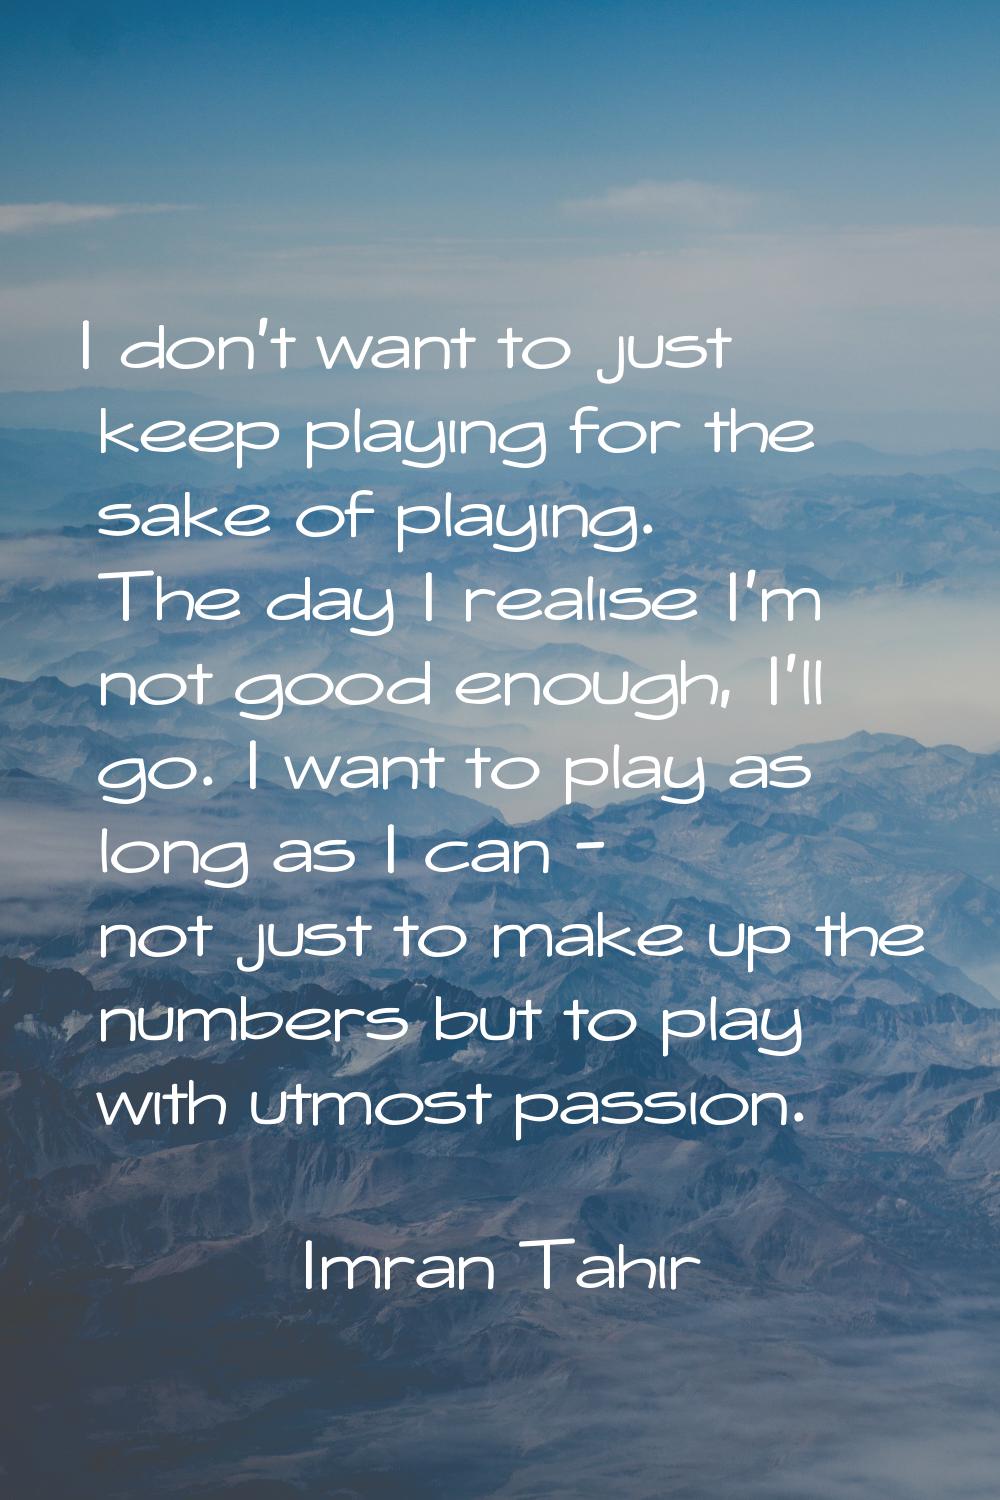 I don't want to just keep playing for the sake of playing. The day I realise I'm not good enough, I